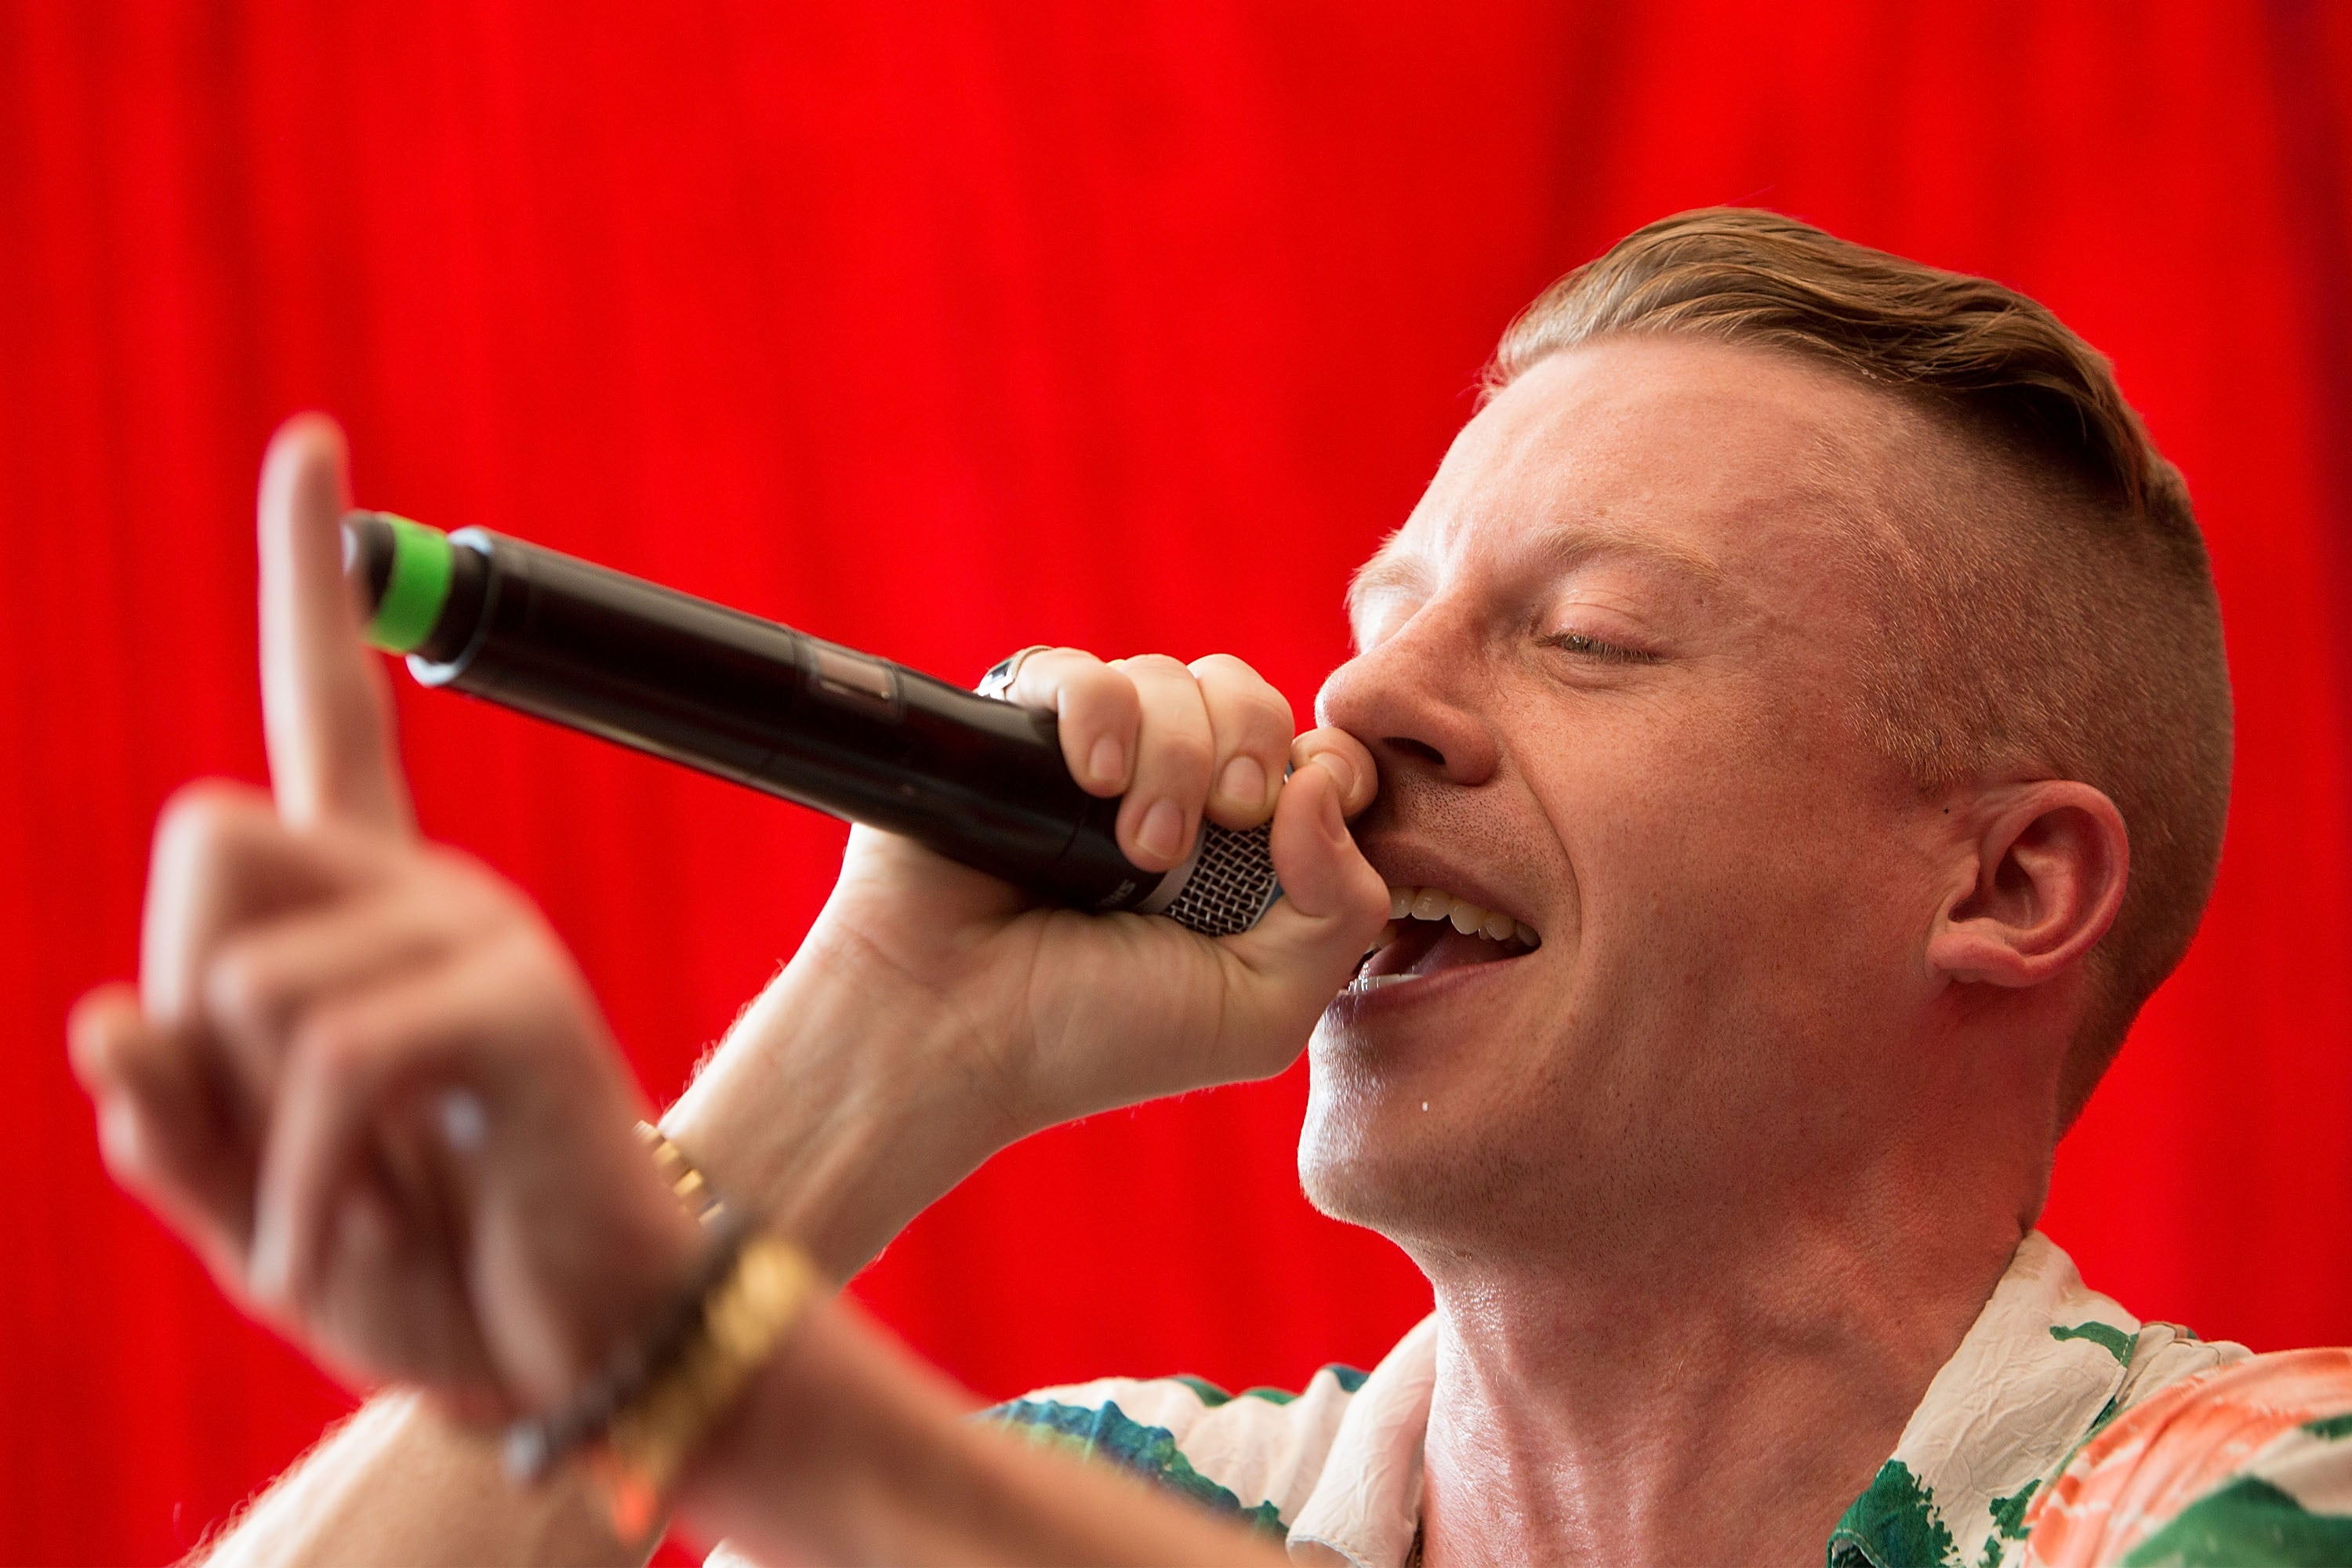 Macklemore in 2013, at the height of his fame